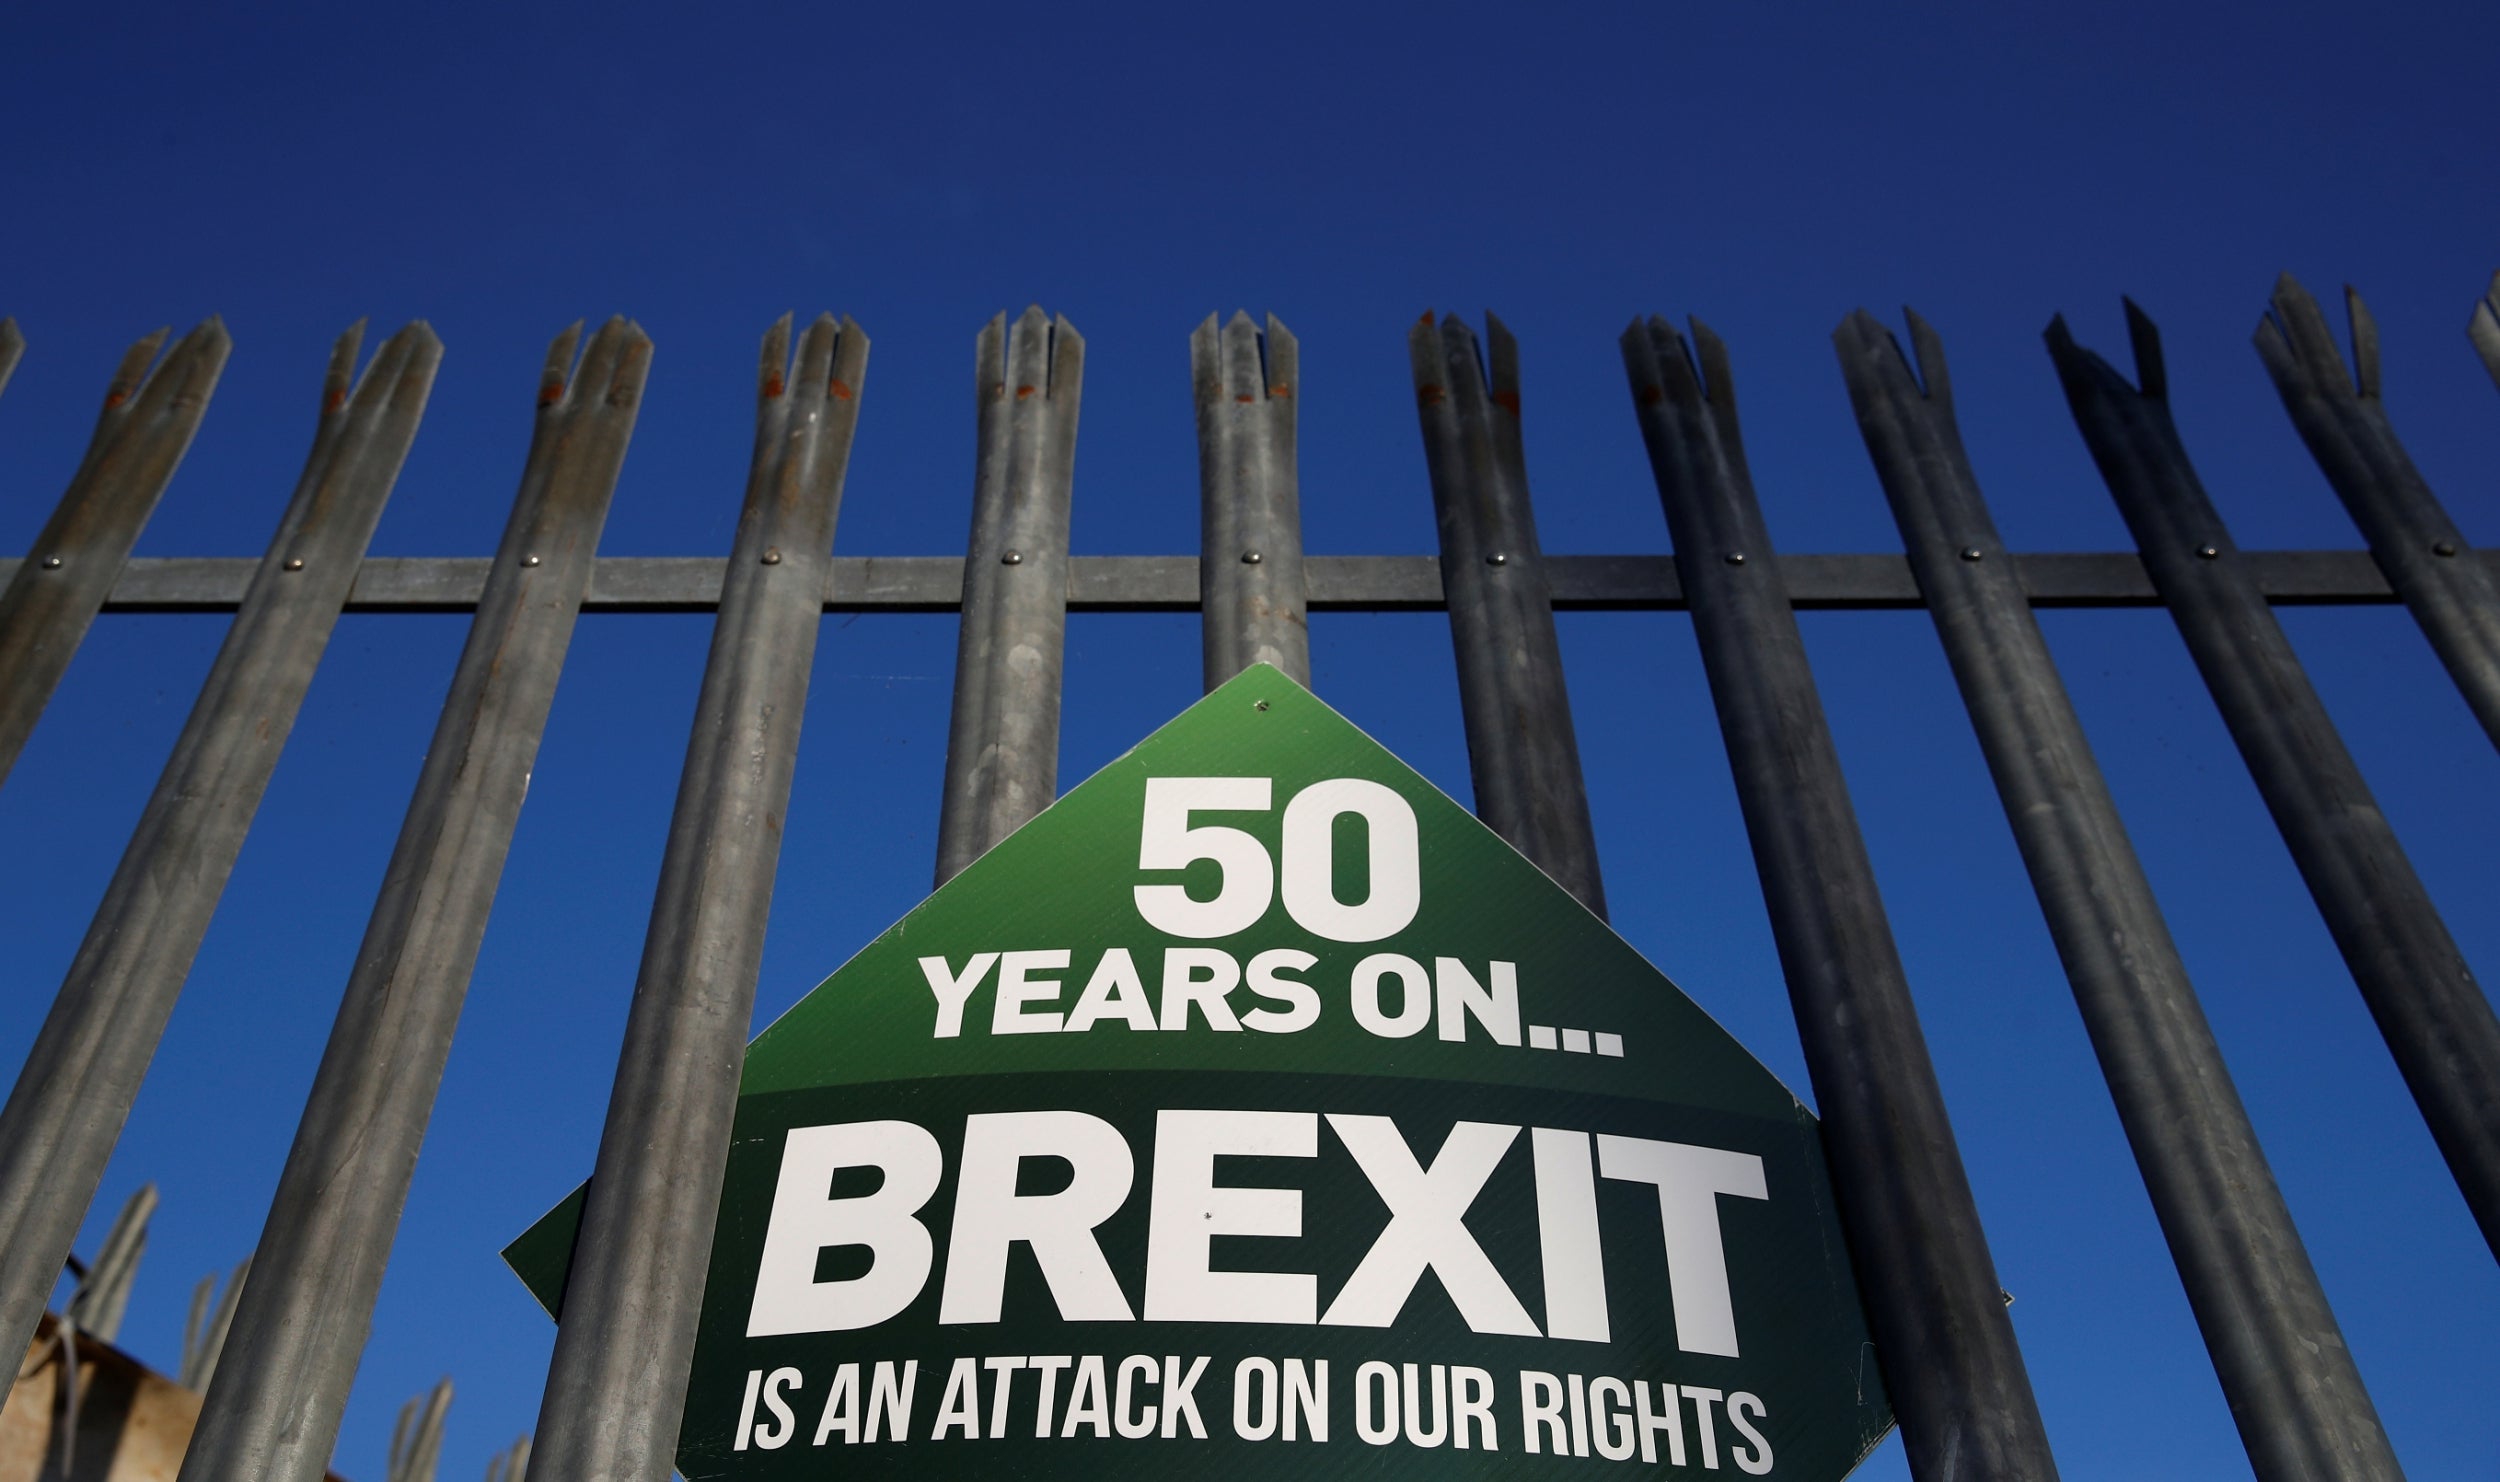 A Sinn Fein anti-Brexit sign hangs on a fence at the border between Ireland and Northern Ireland